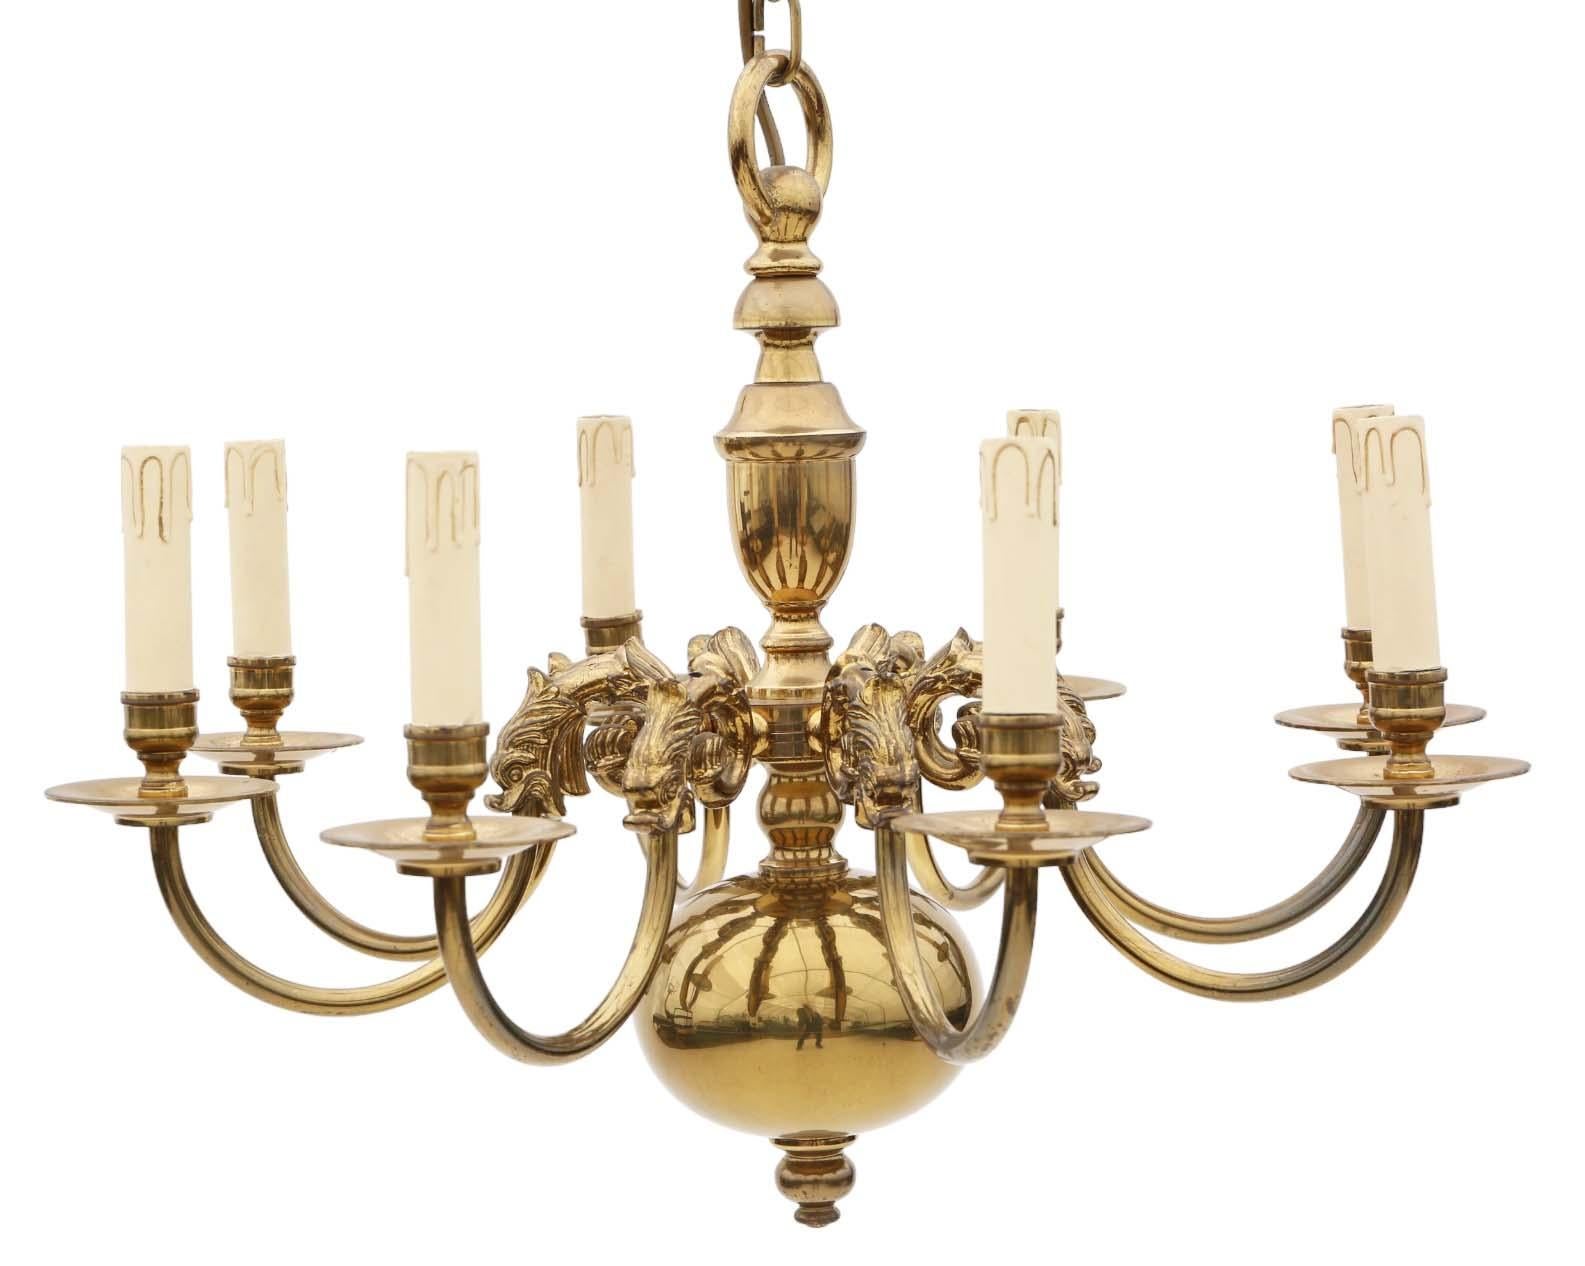 Vintage Ormolu Brass Chandelier with 8 Lamps/Arms.

This chandelier boasts a patinated gold finish on brass and other metals, adding to its vintage appeal.

Around 60 years old, it carries a nice age and patina, sure to catch the eye and enhance any